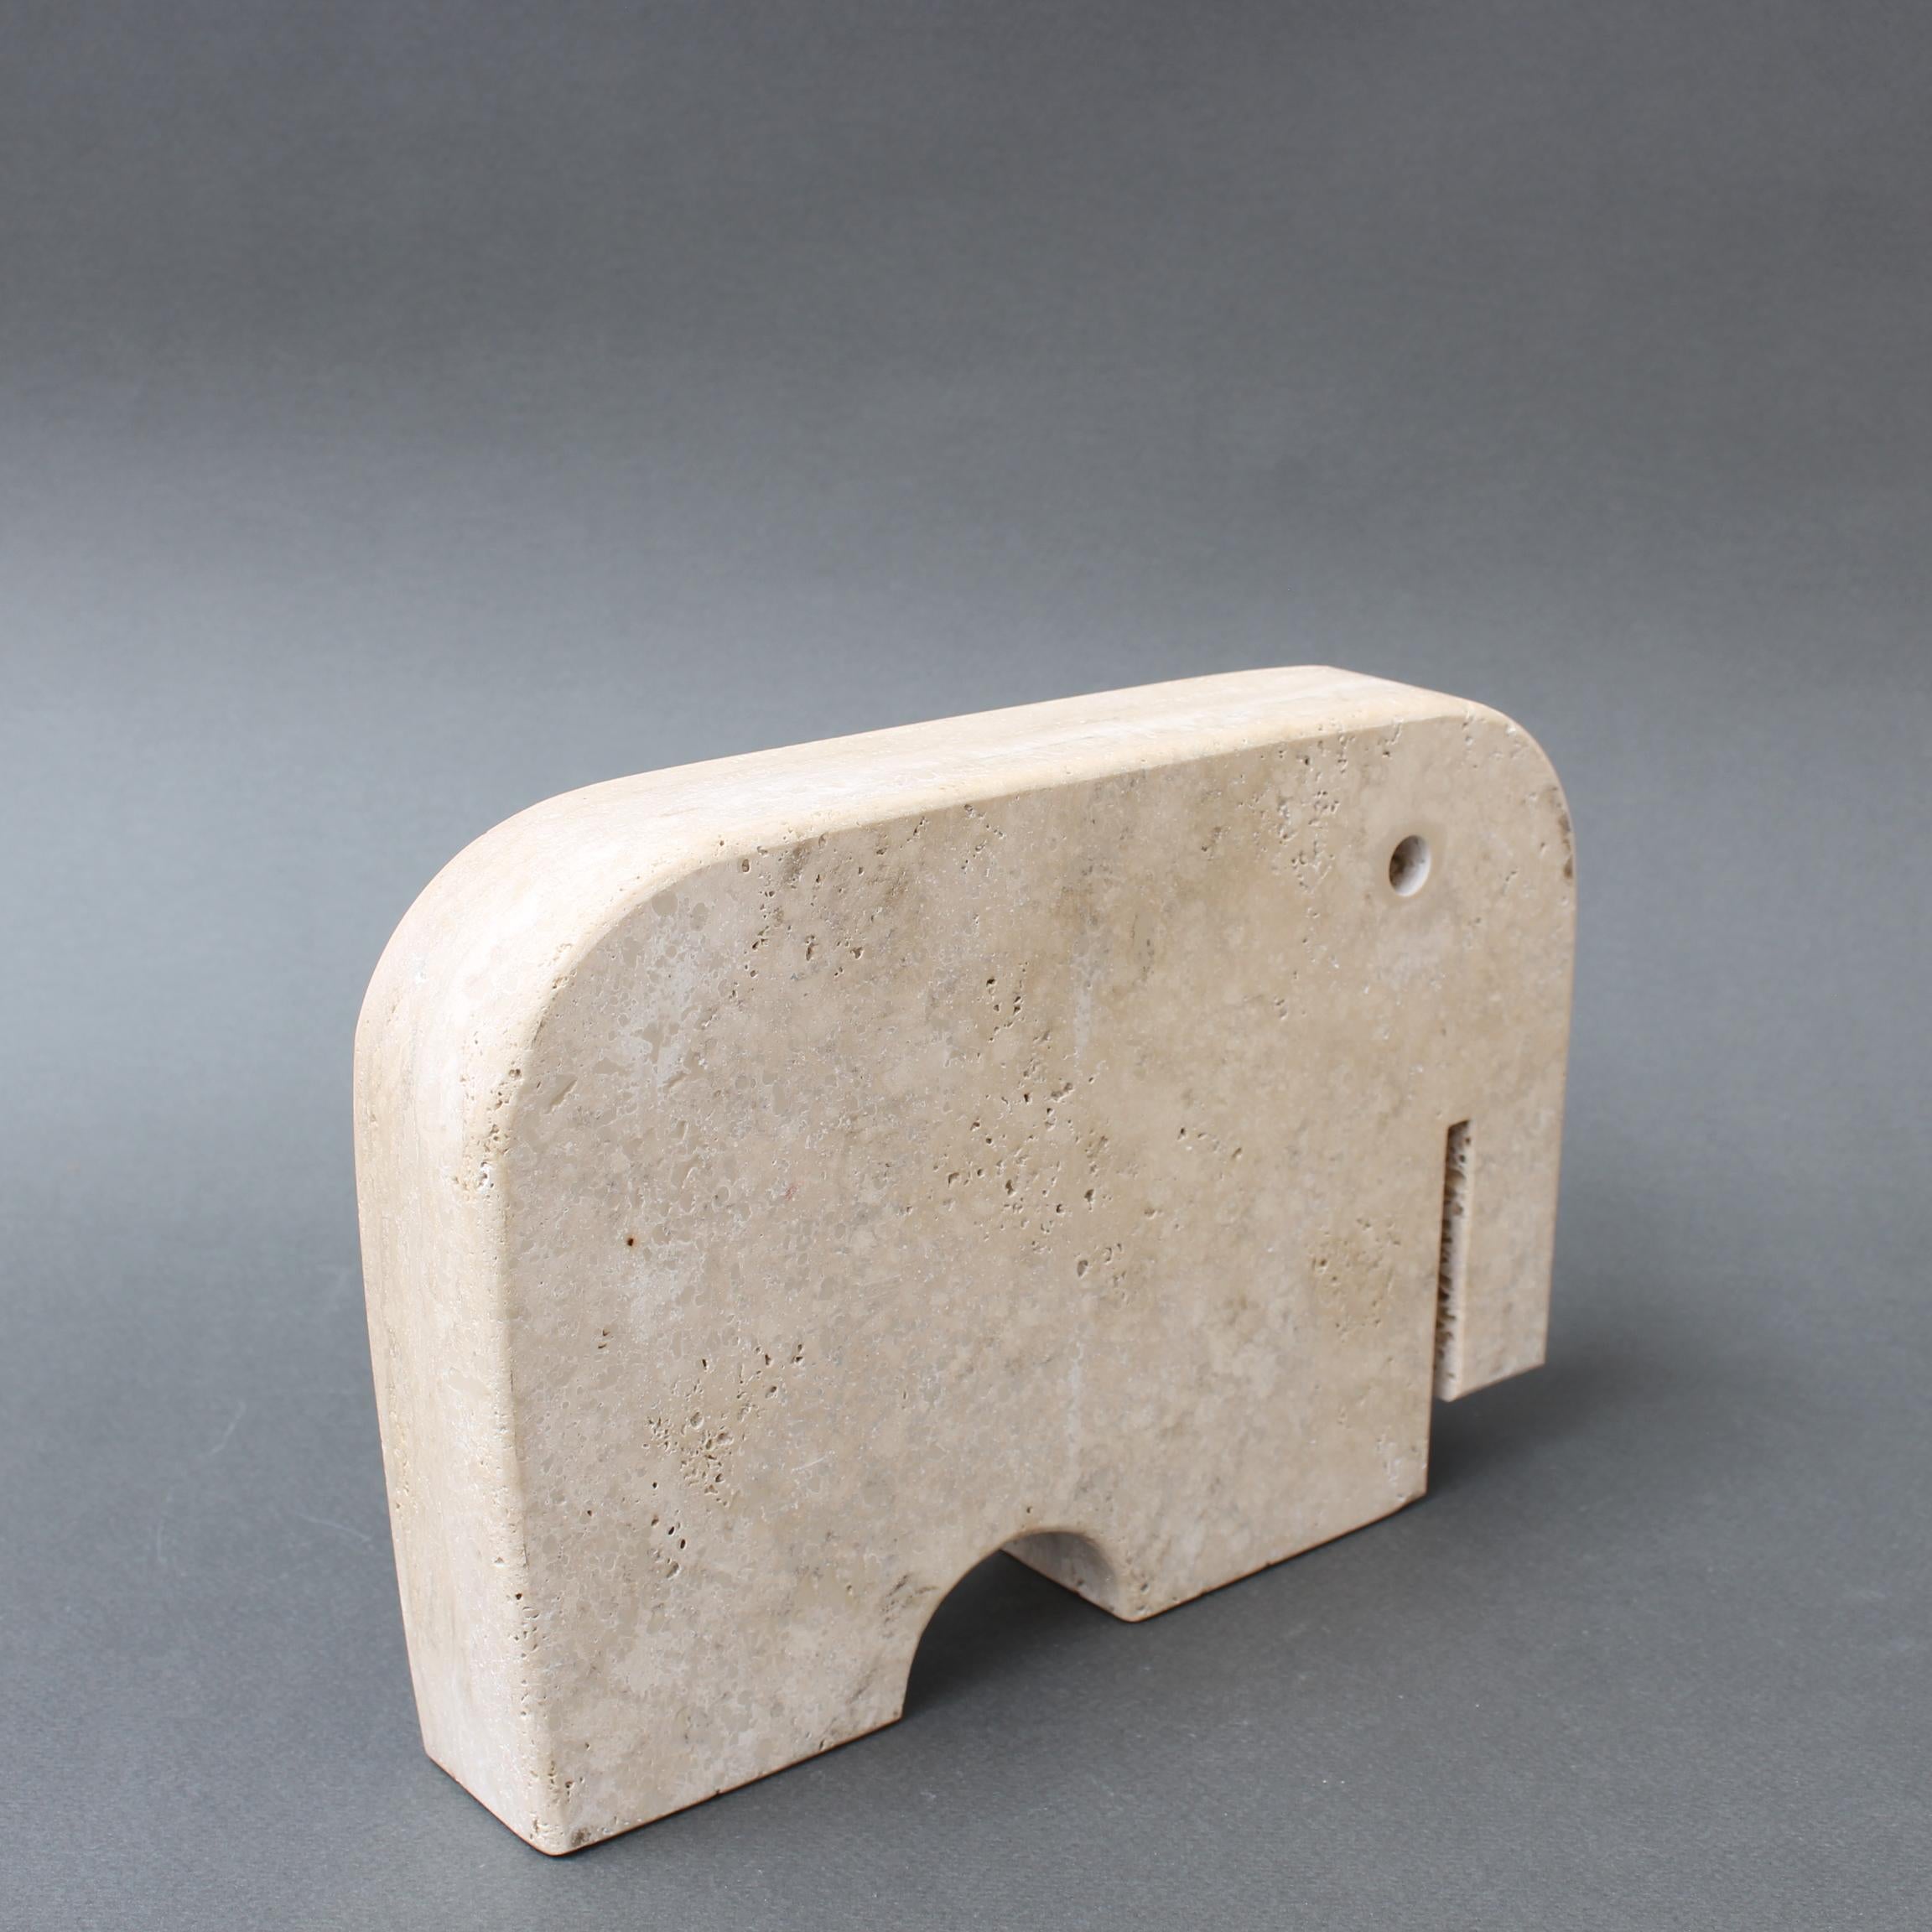 Vintage Italian Travertine Elephant by Mannelli Bros (circa 1970s) For Sale 1